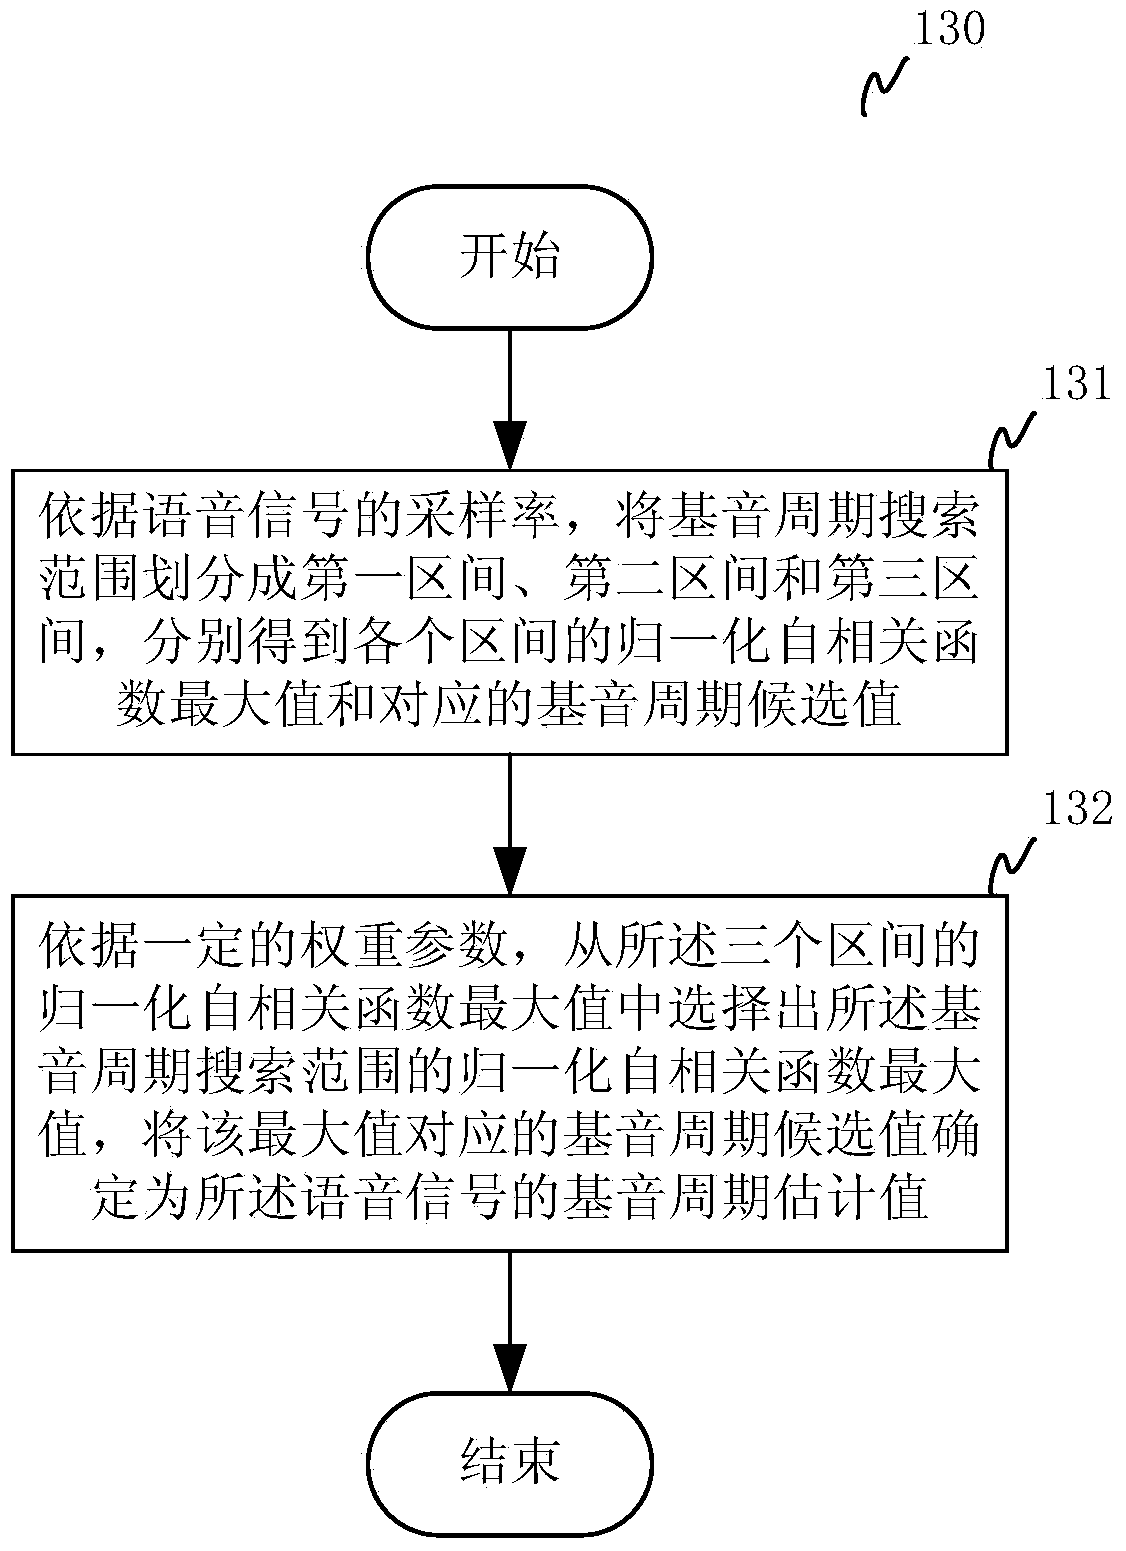 Voice pitch period estimation method and device